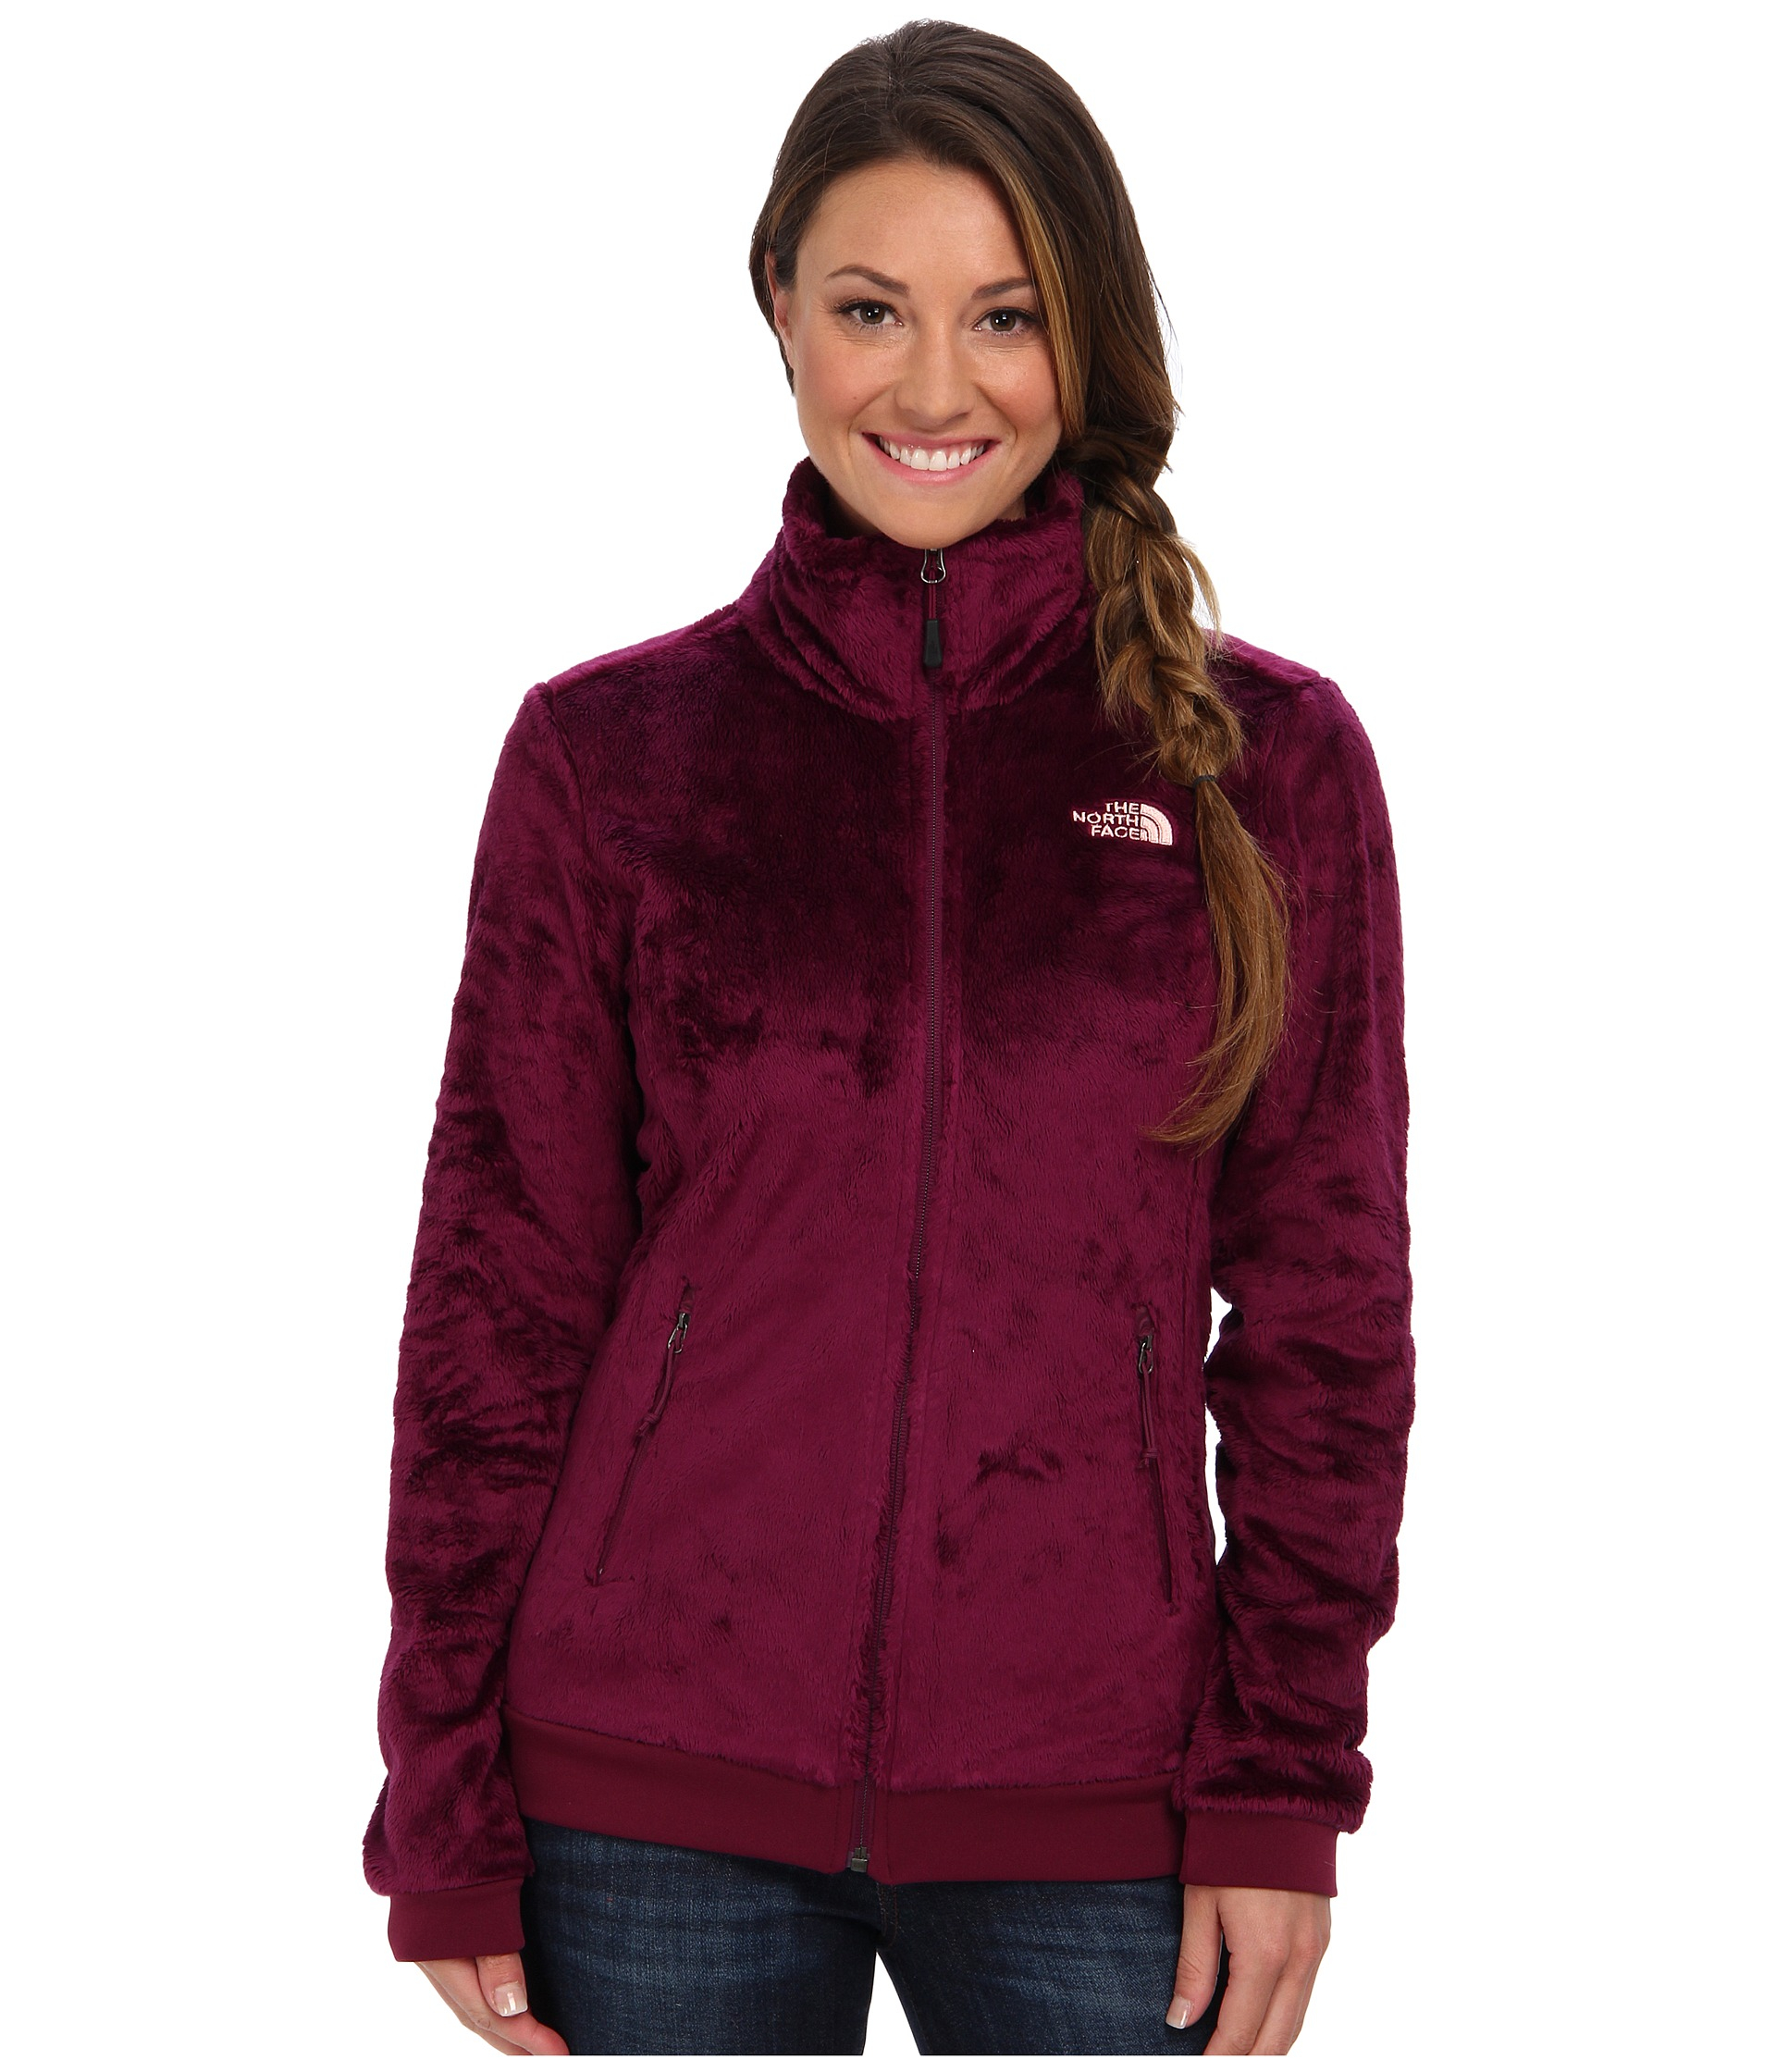 Lyst - The north face Mod-Osito Jacket in Purple